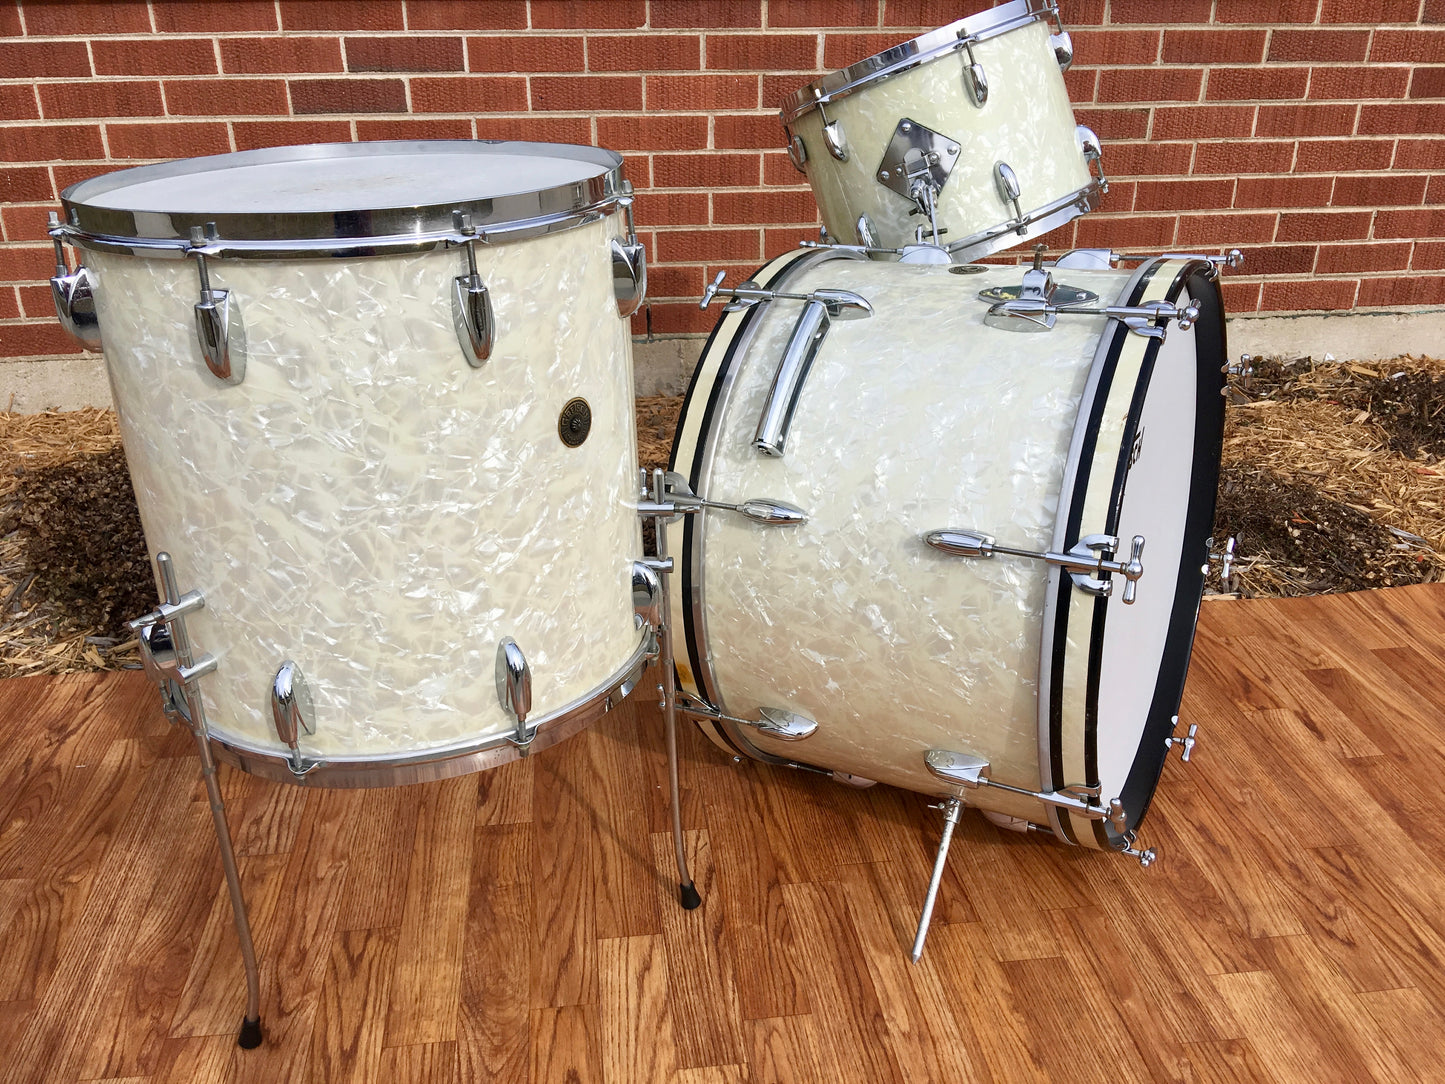 1954 Gretsch BroadKaster "Name Band" White Marine Pearl Drum Set w/ 6.5x14 Gladstone Snare Drum *Time Capsule*